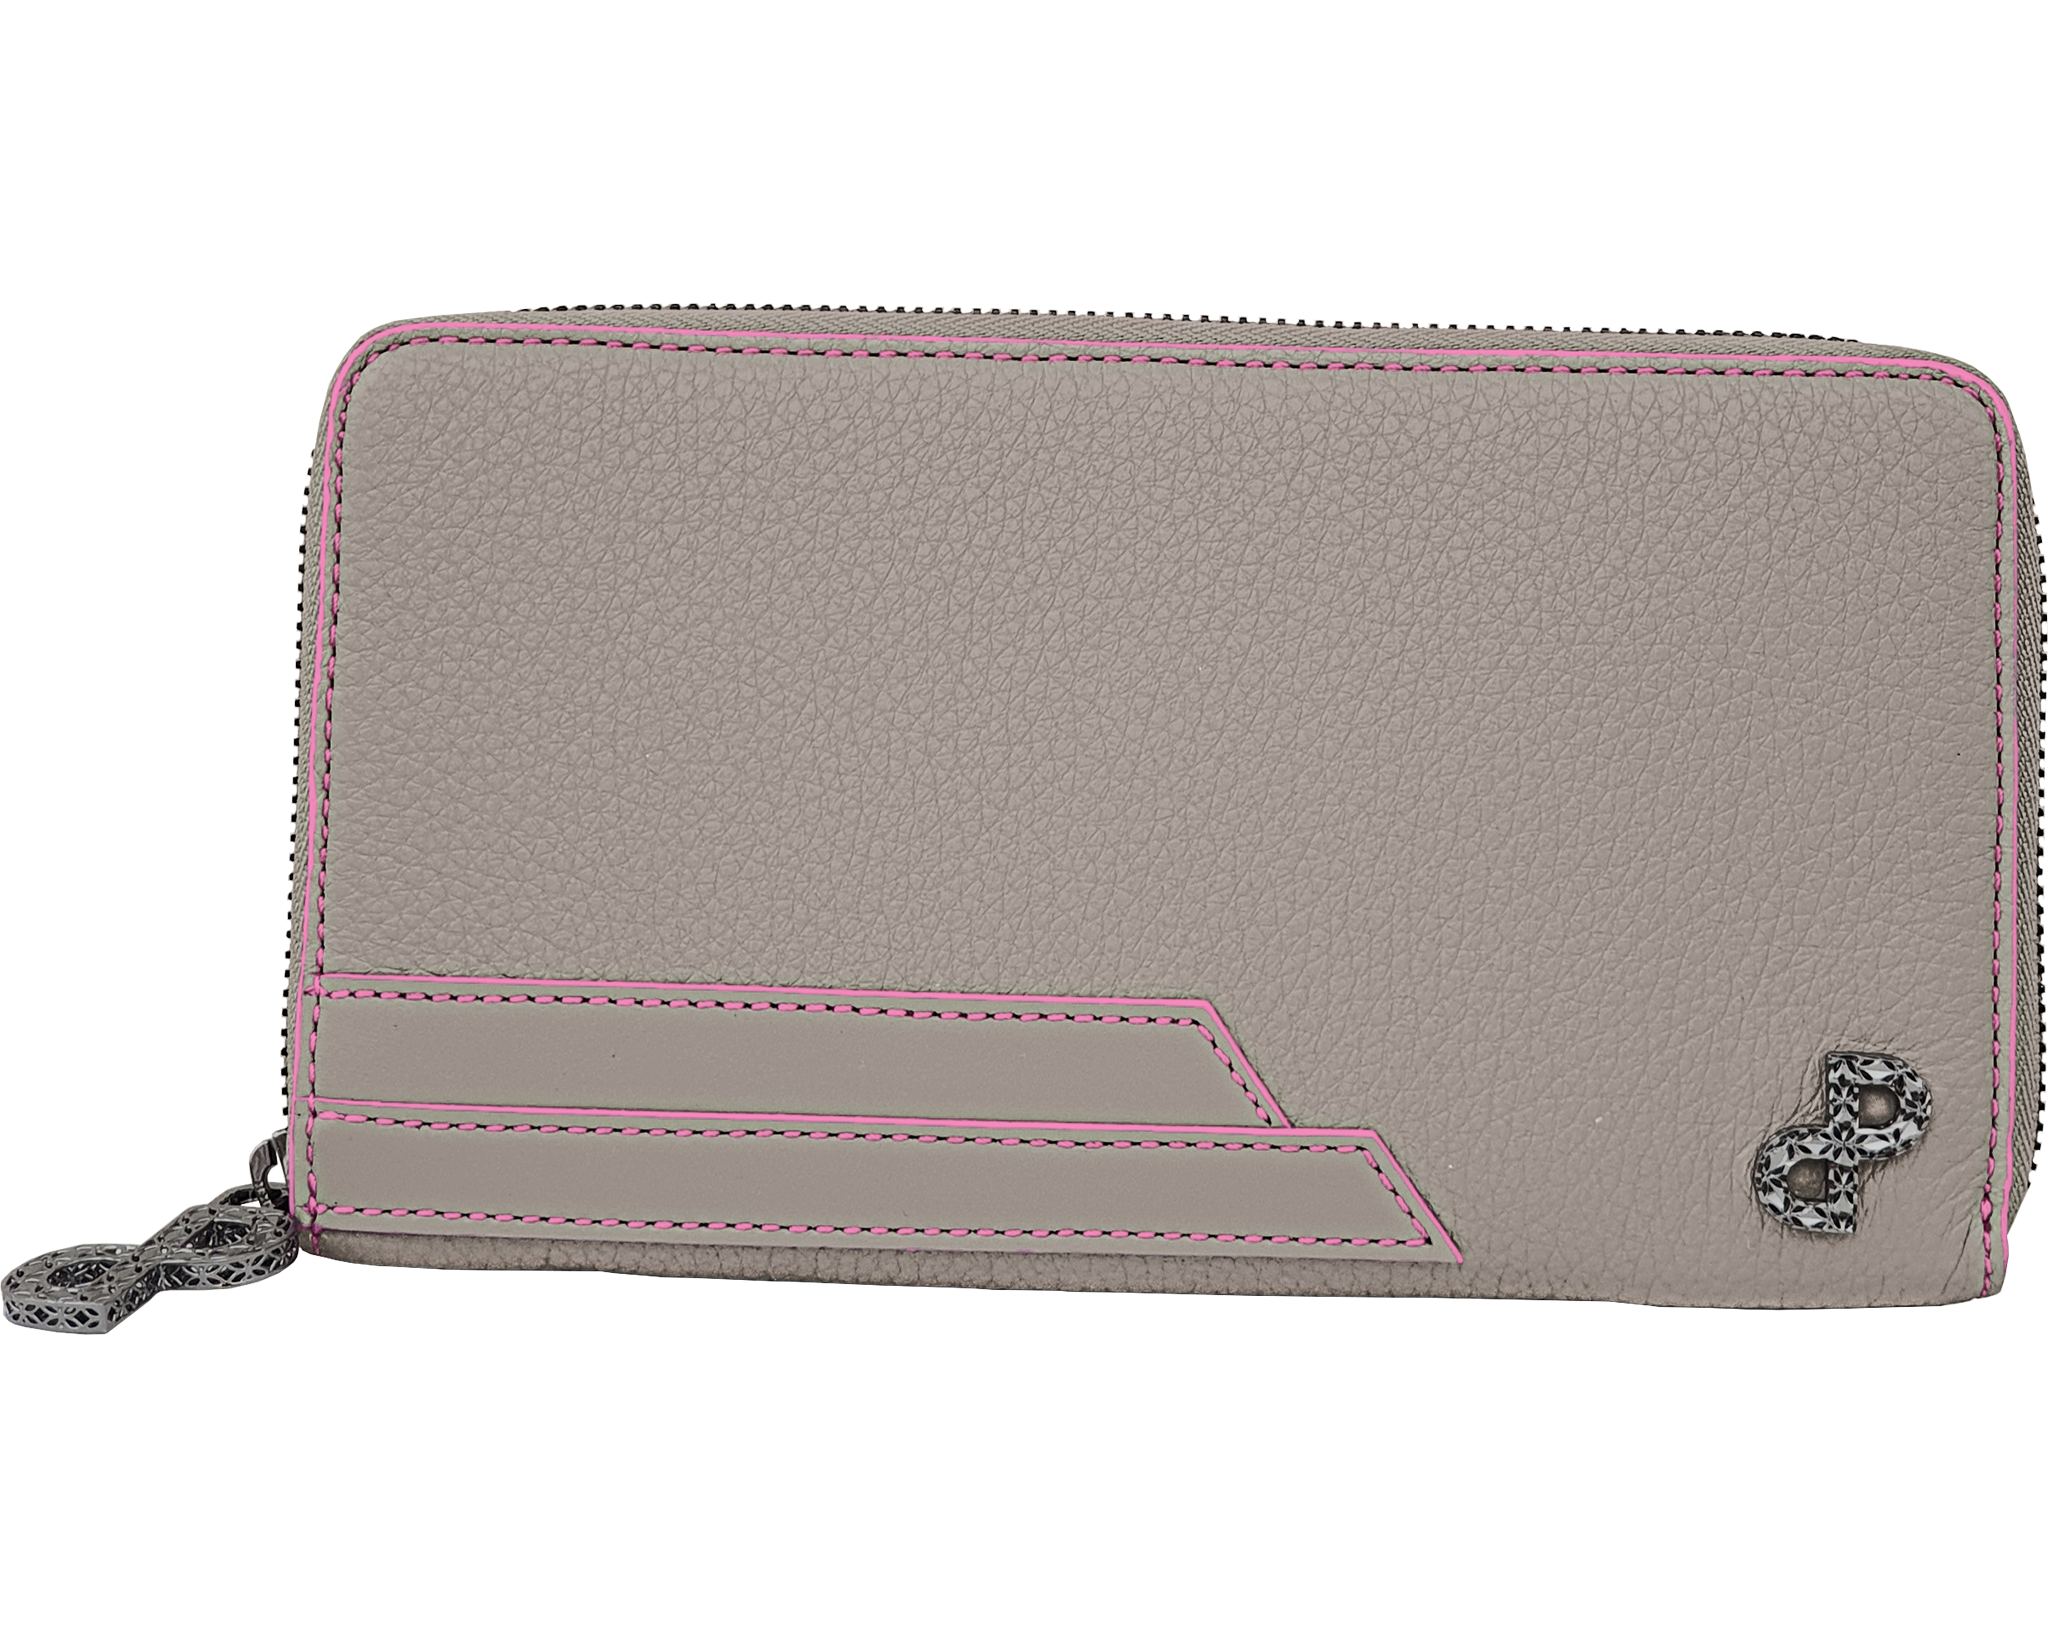 LUCILLA  All in ONE wallet with its distinctive style and meticulous attention to detail emerged in a luxurious flair. Each piece is individually crafted with featherweight, hand-carved, 3D Forever Logo in 18k Rose Gold  which elegantly adorns its front, the inner zipper pull and its Signature bright pink edges enrich its structure – All MADE IN ITALY